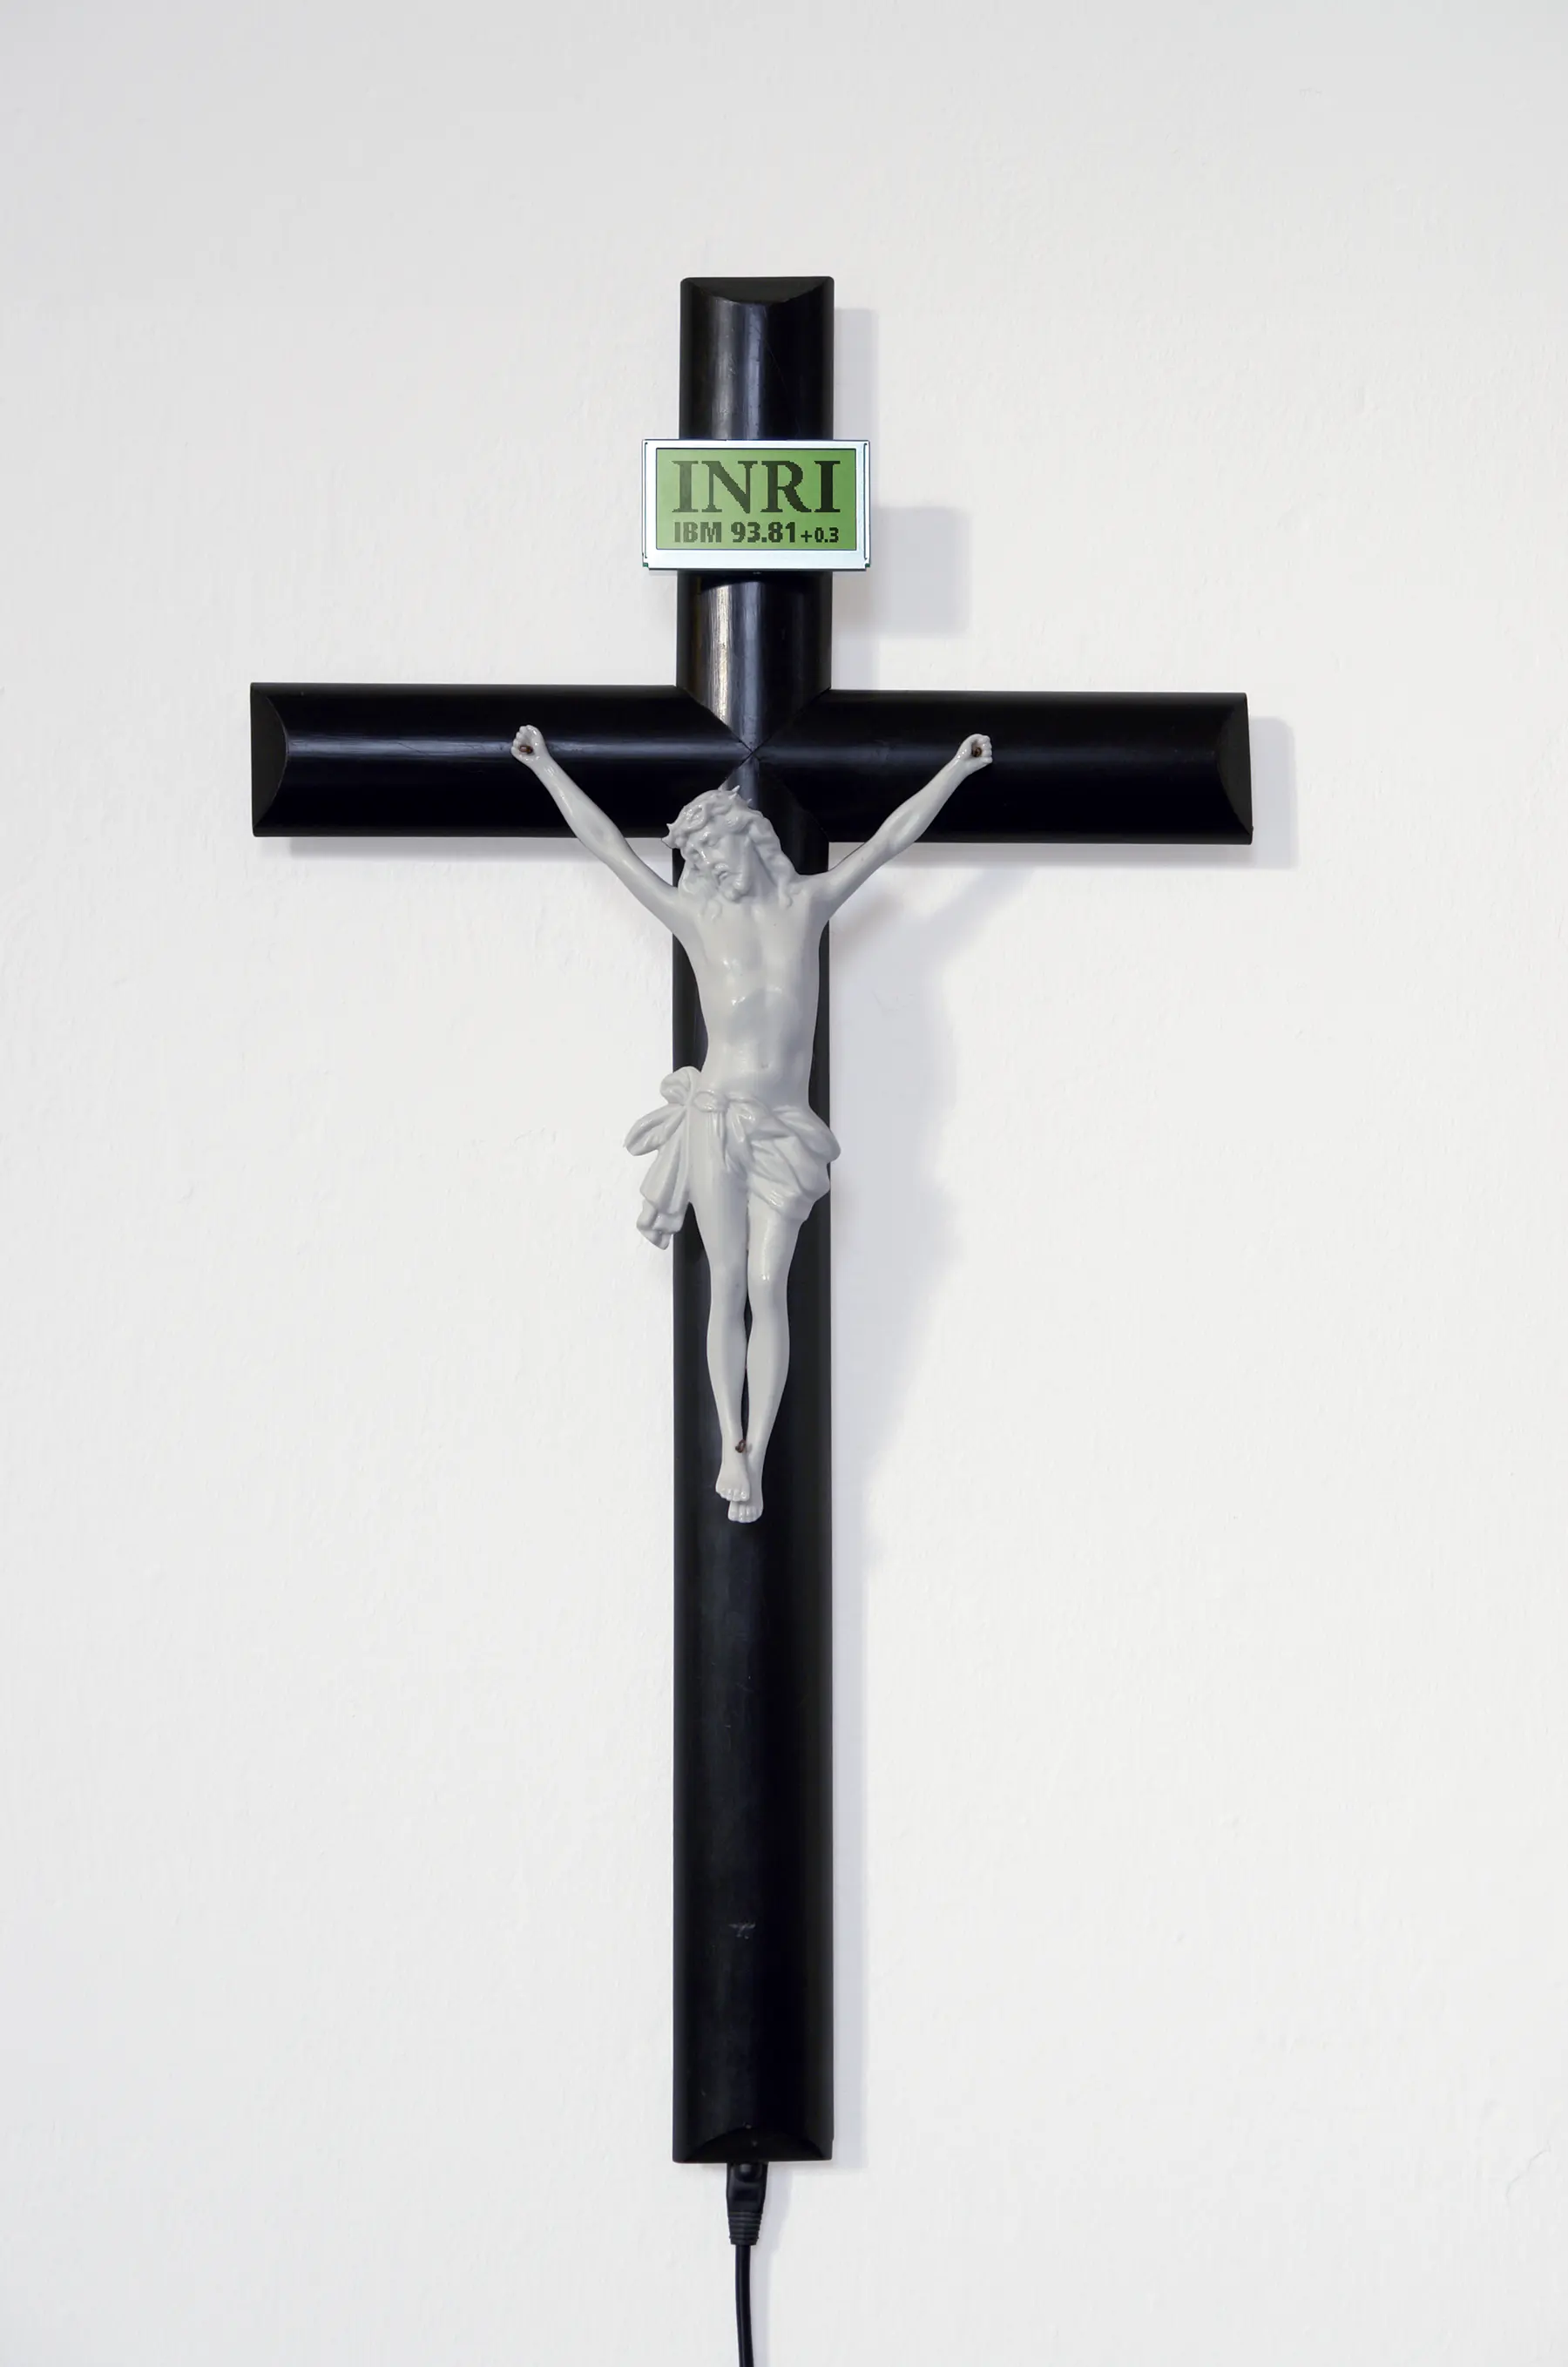 A crucifix. A the position of the INRI inscriptions sits a LCD screen, which displays stock excahnge prices: (IBM, Disney...)